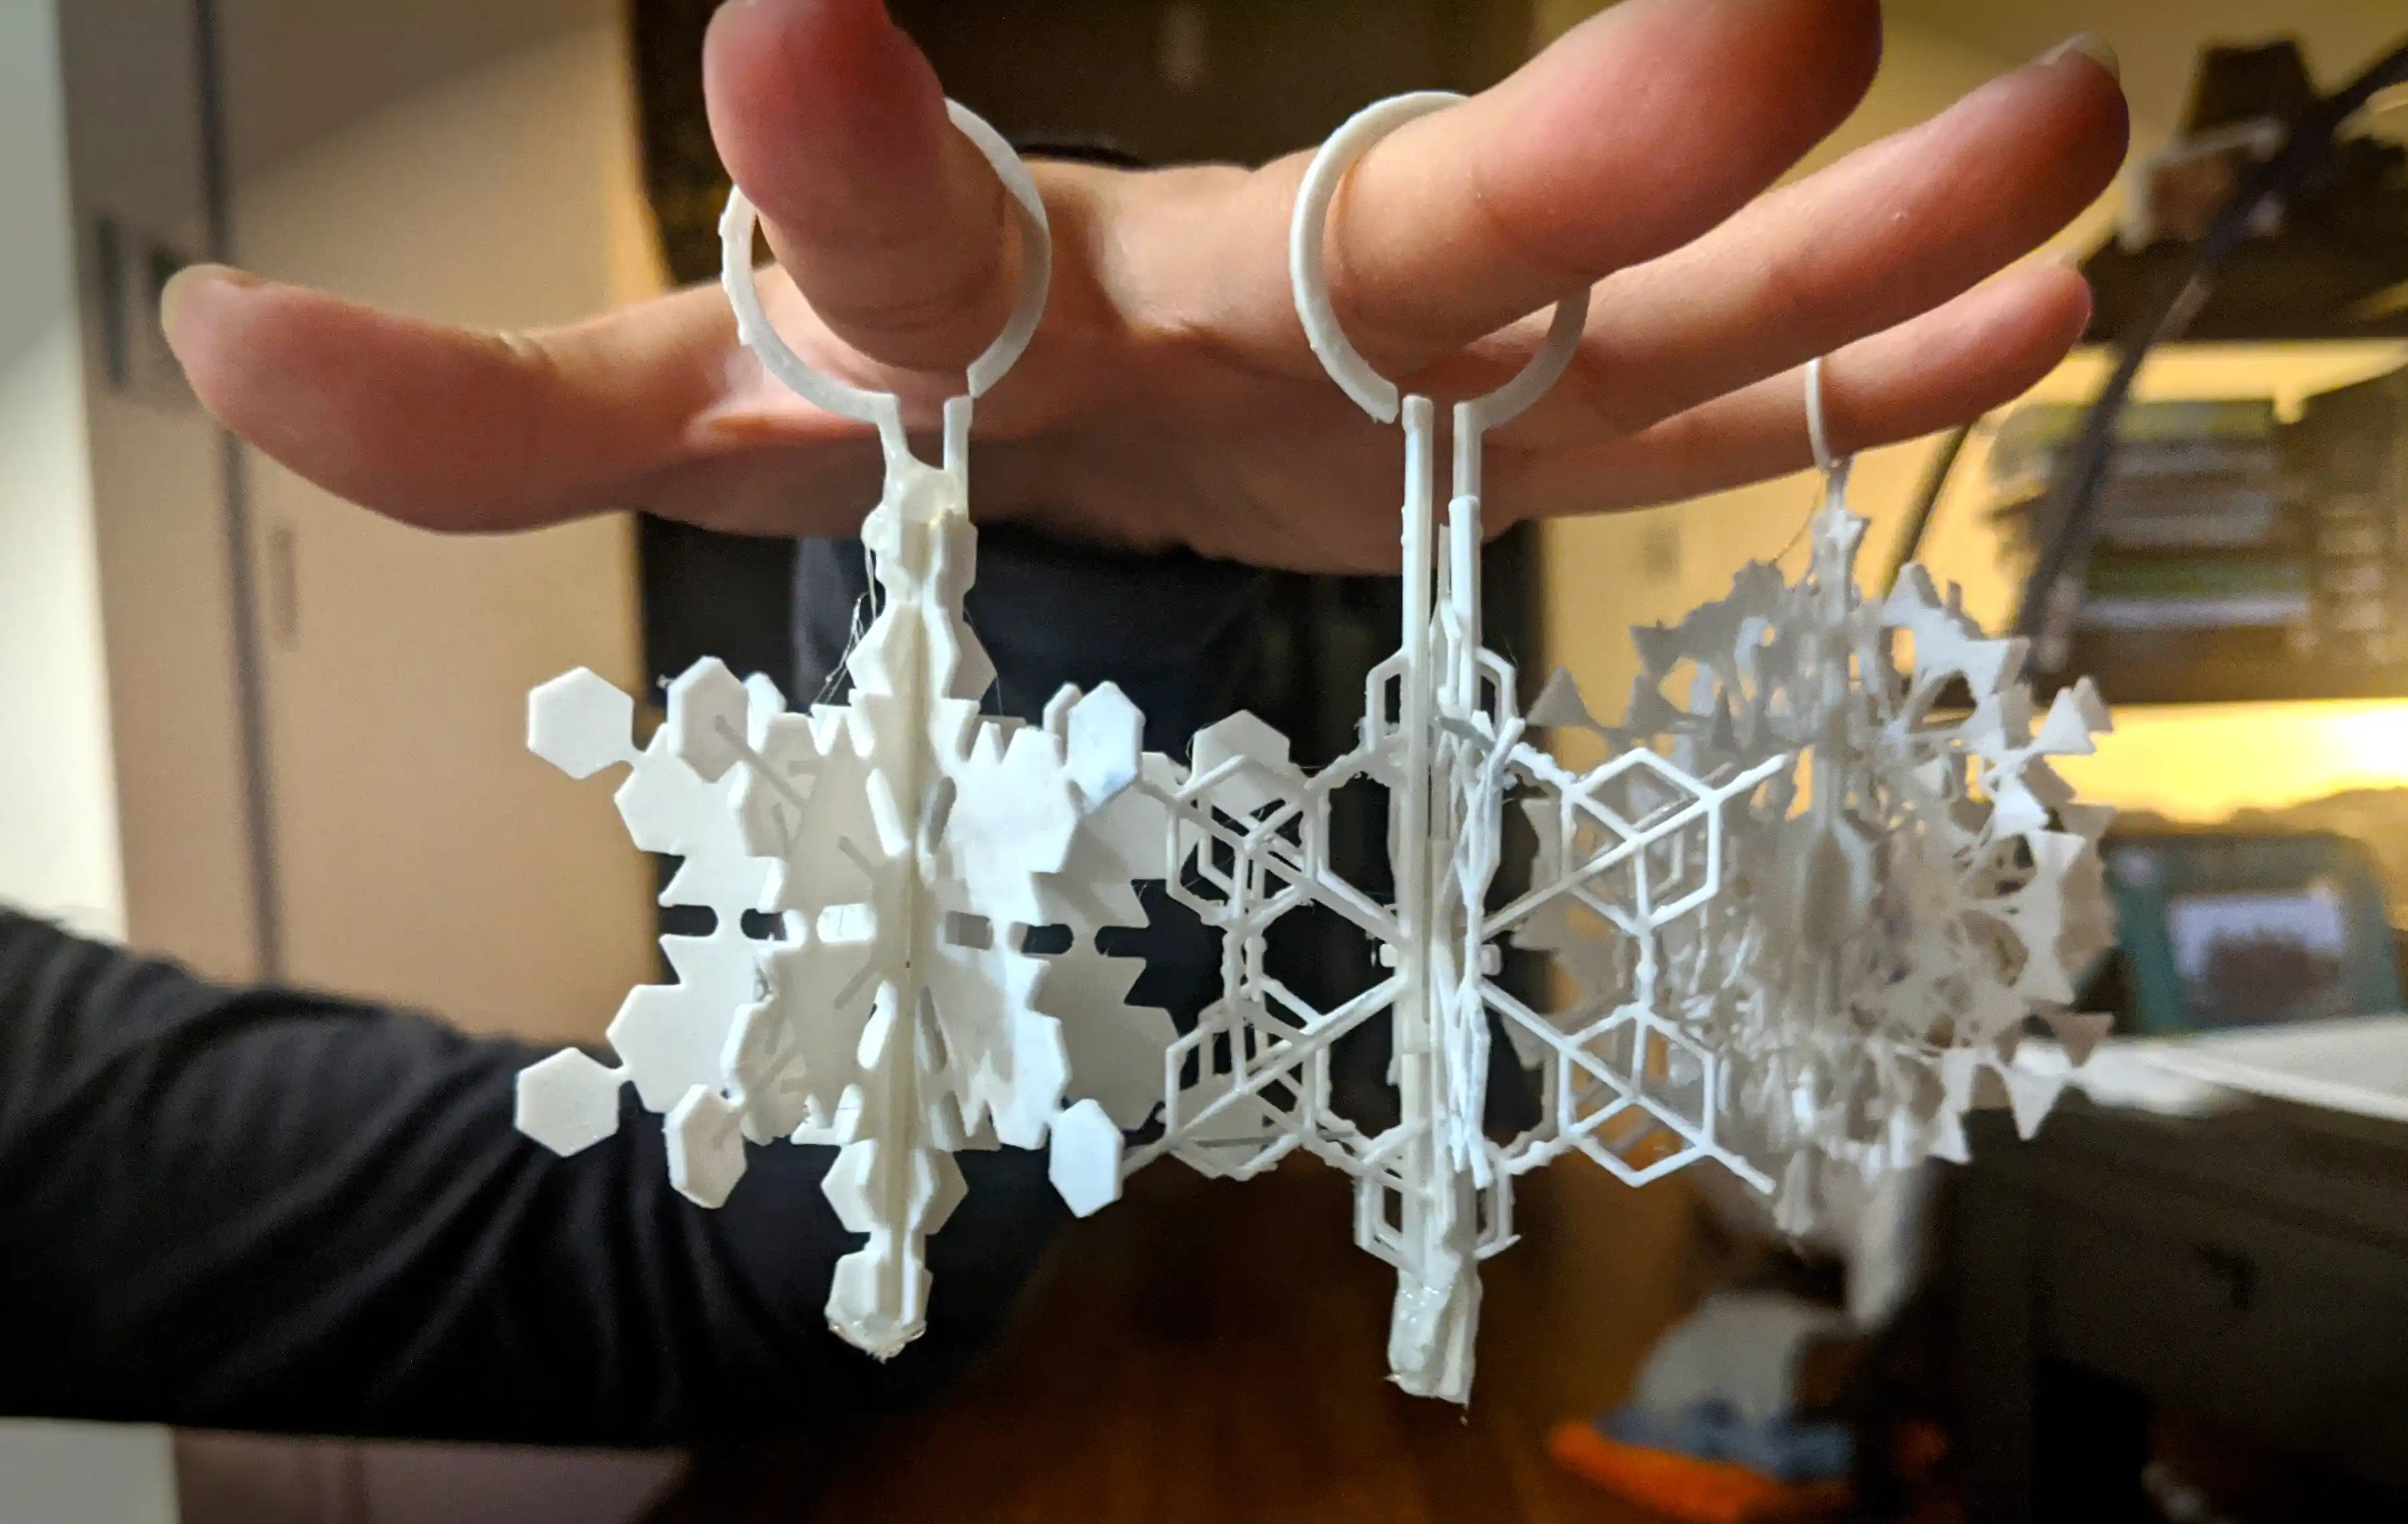 Holding 3D printed snowflake ornaments